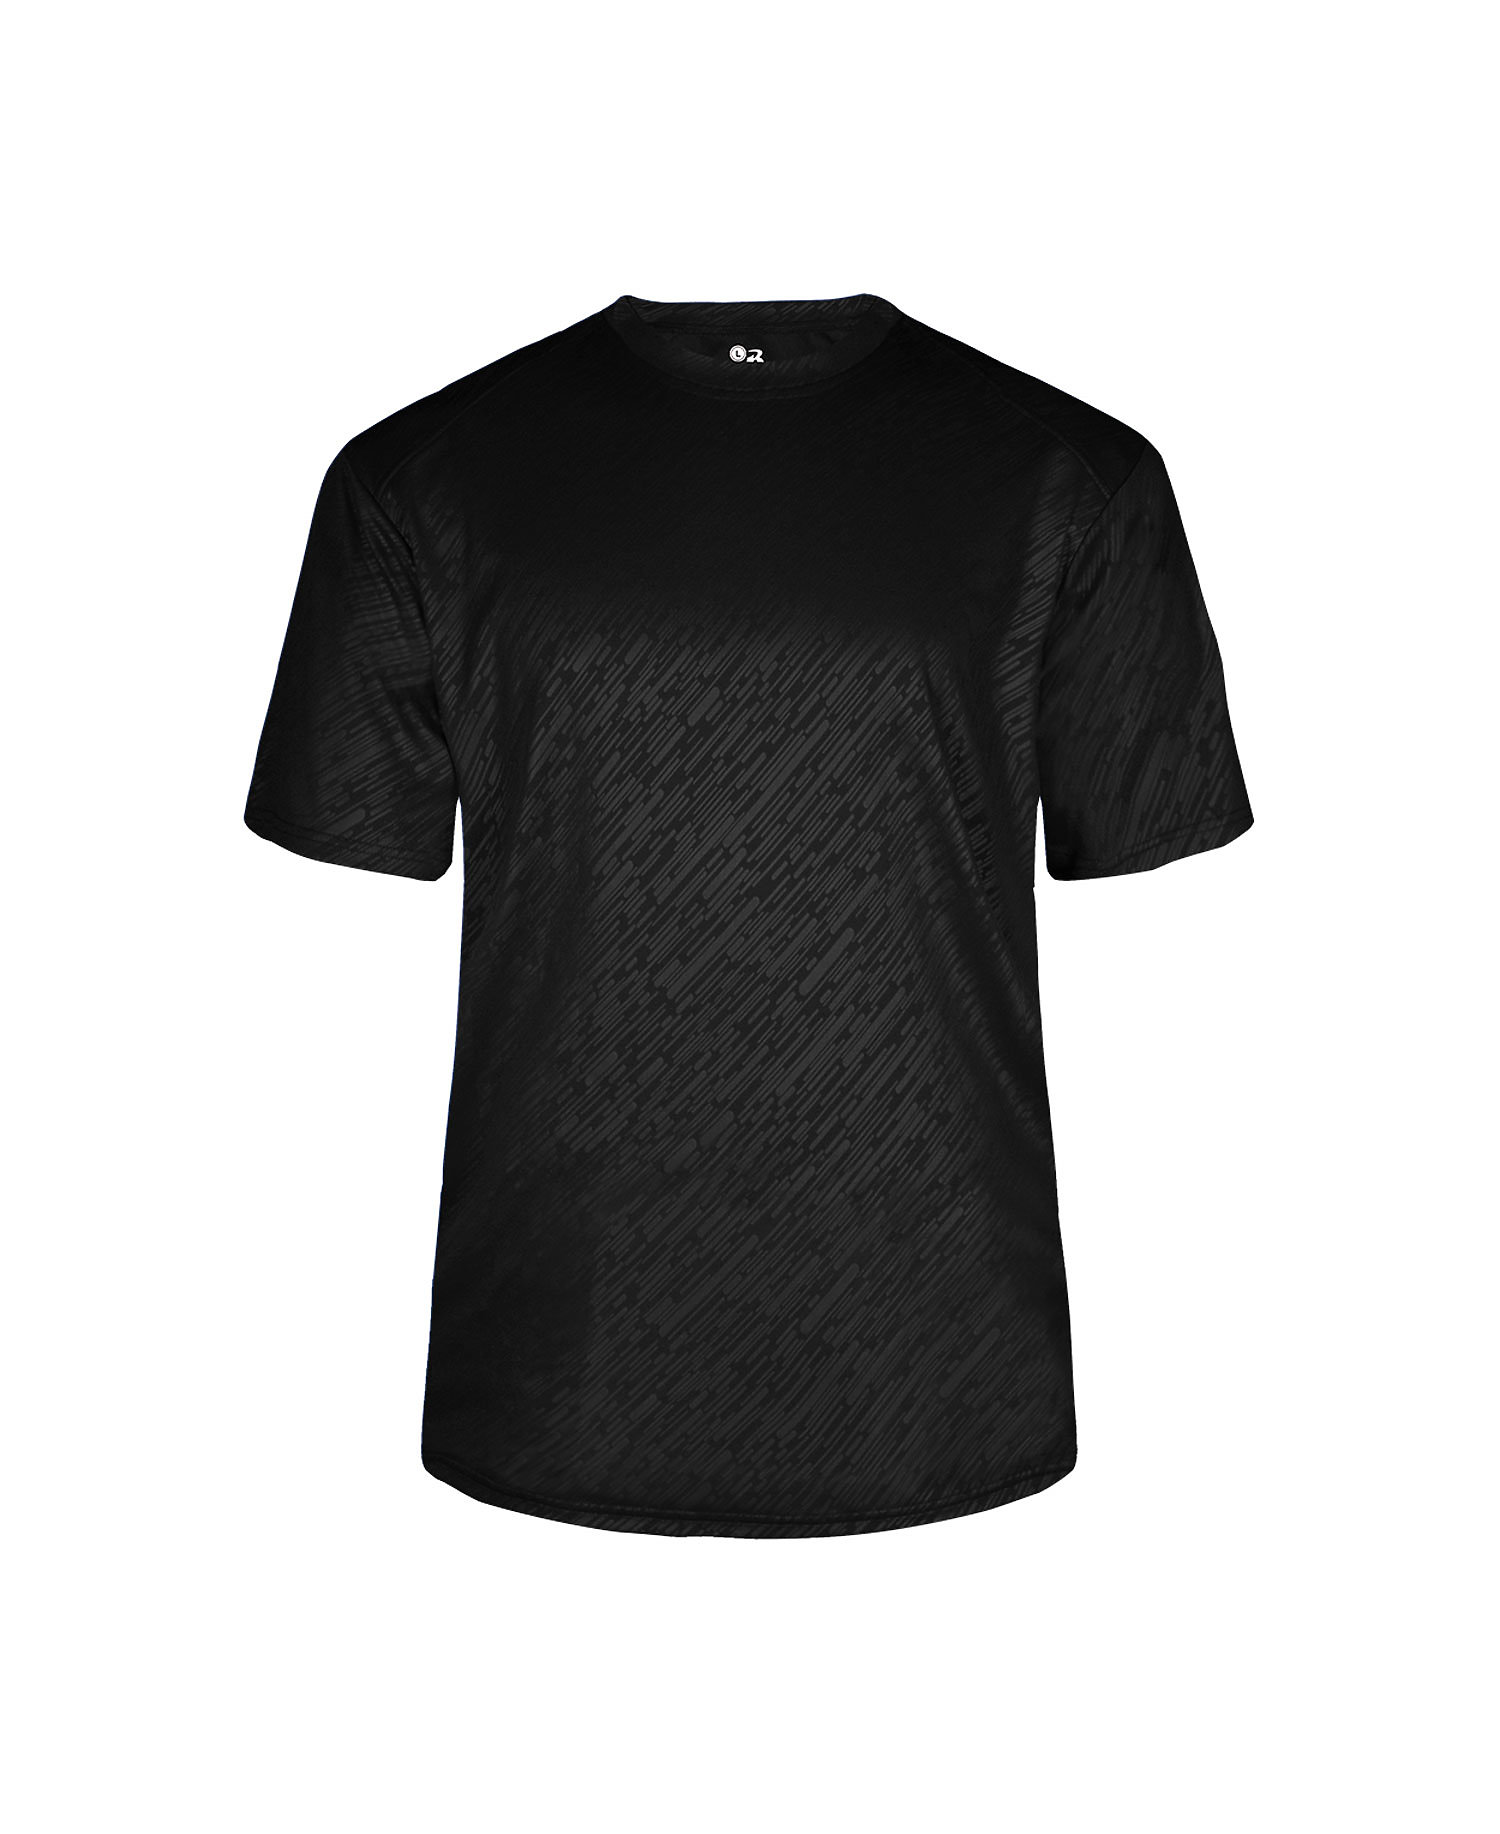 Badger Sport 2131 - Youth Lined Embossed Tee